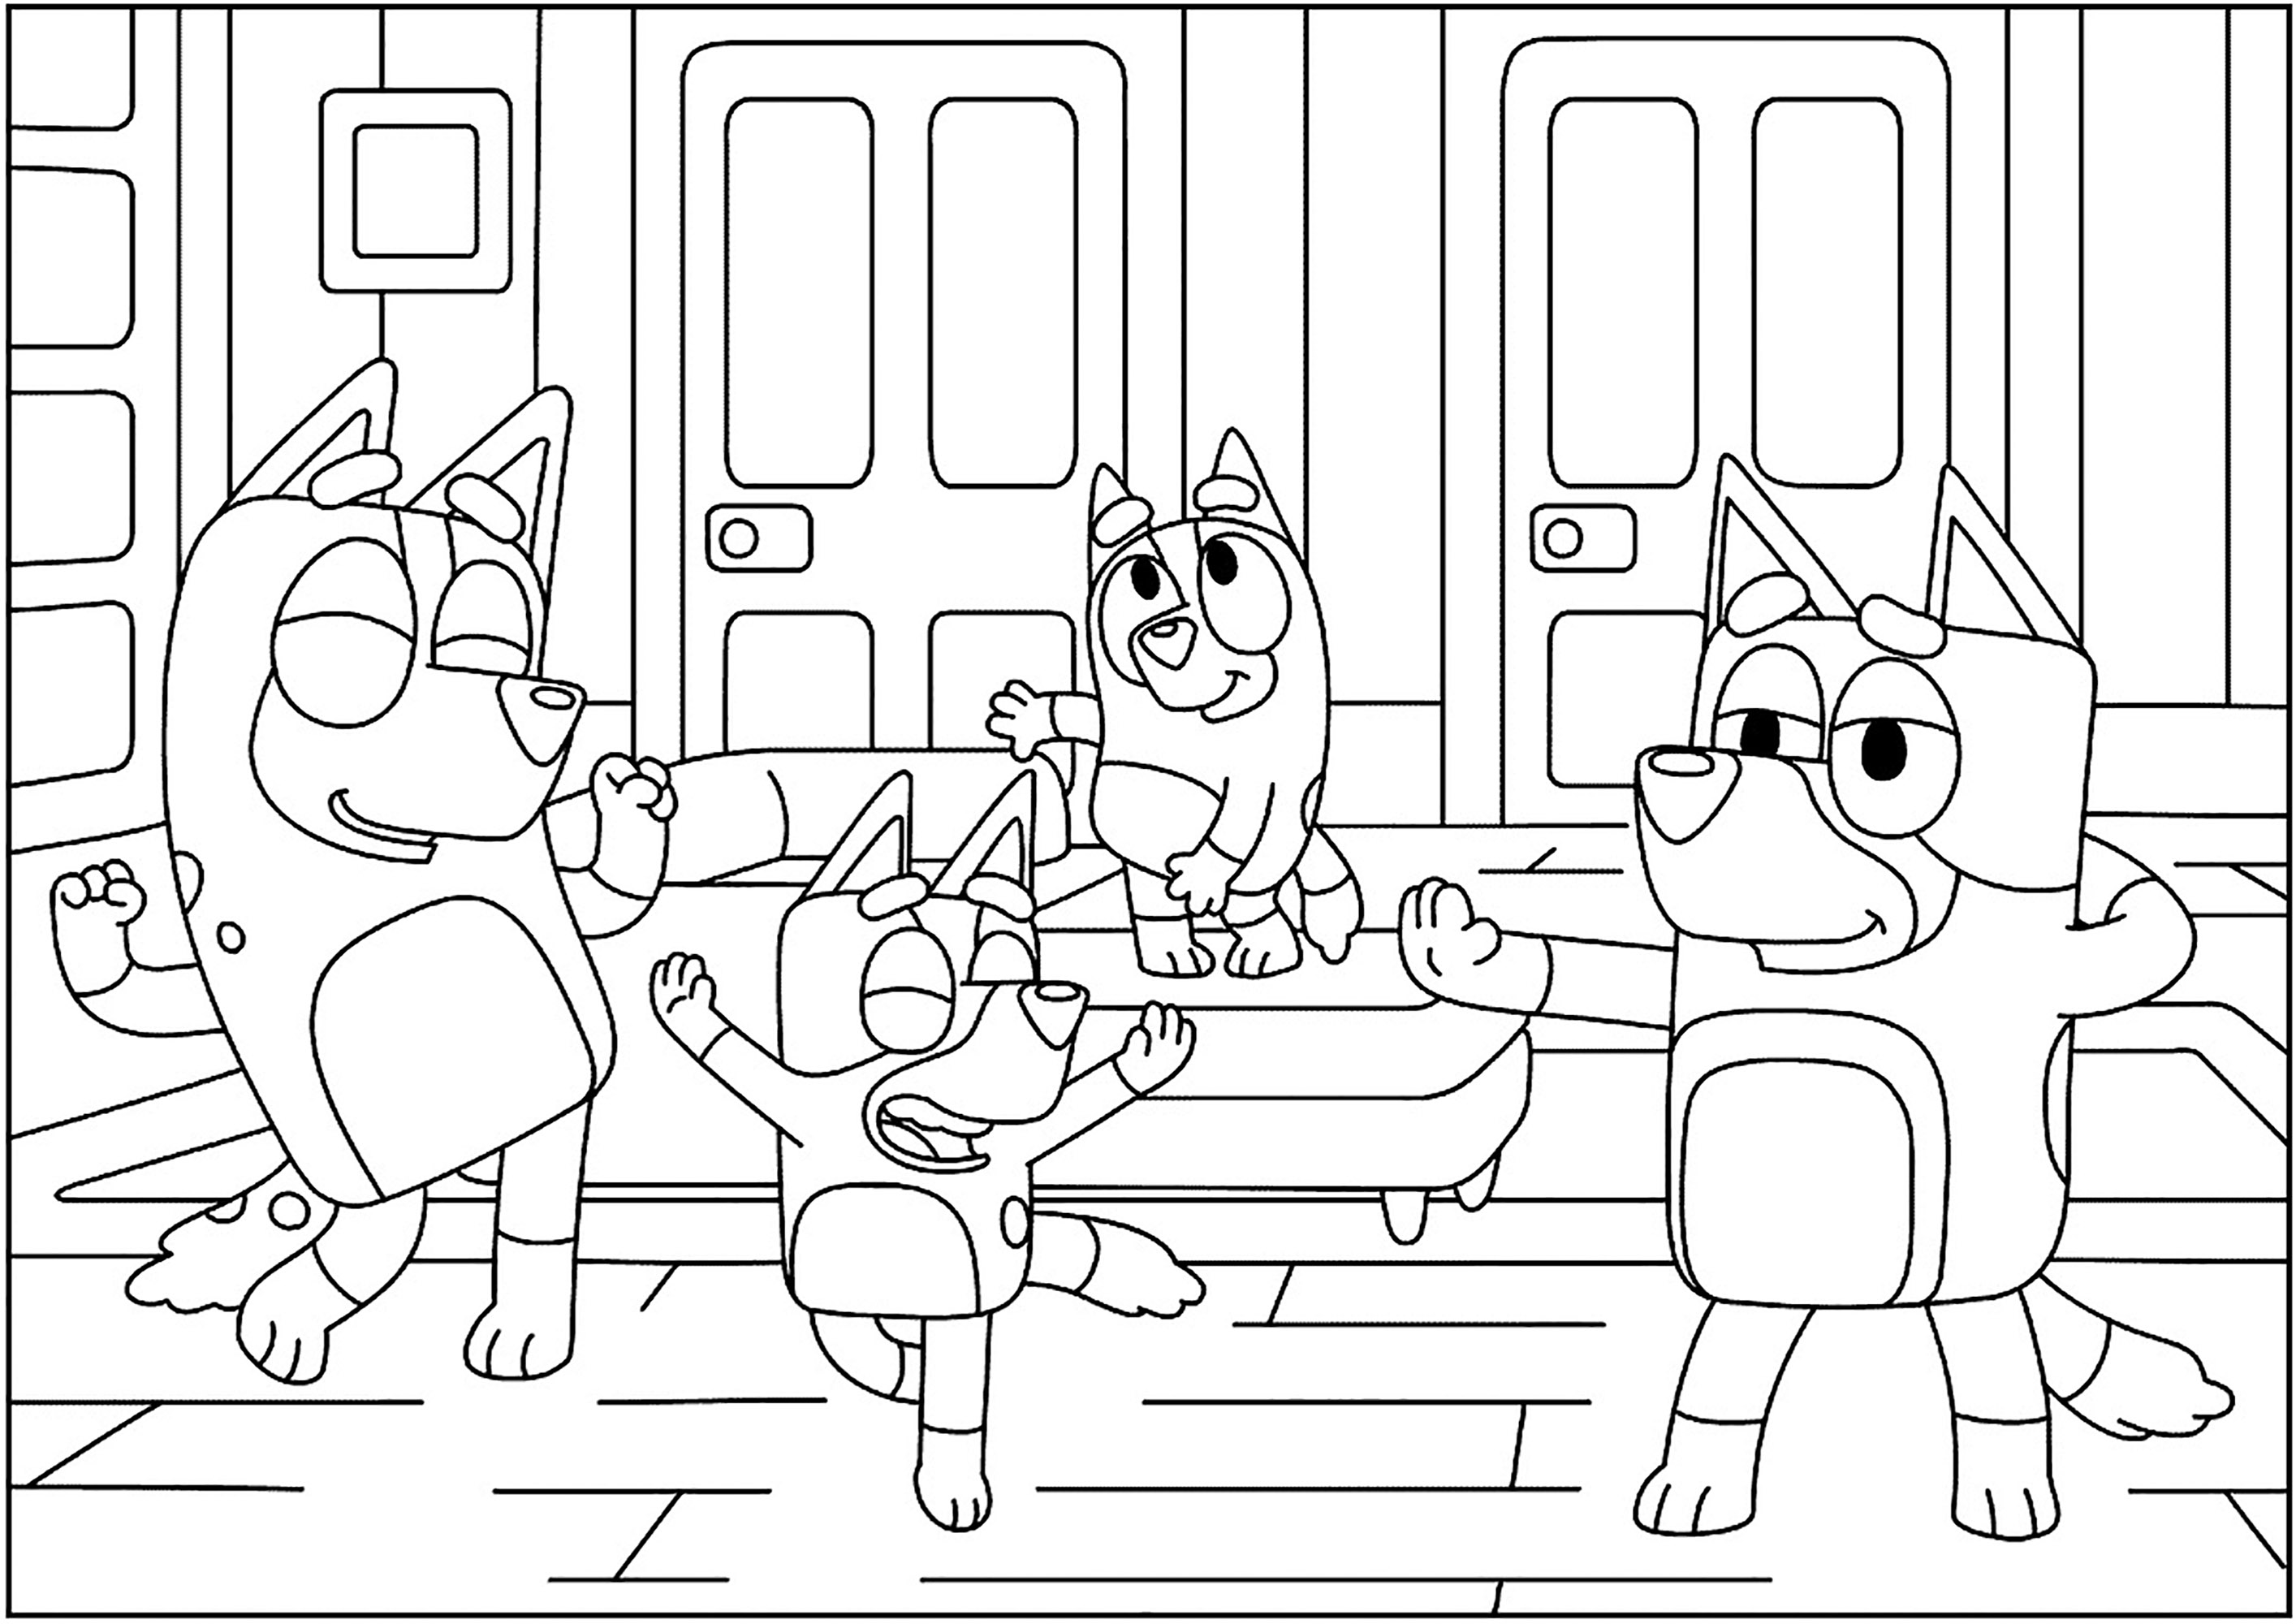 Coloriage page with Bluey : dance